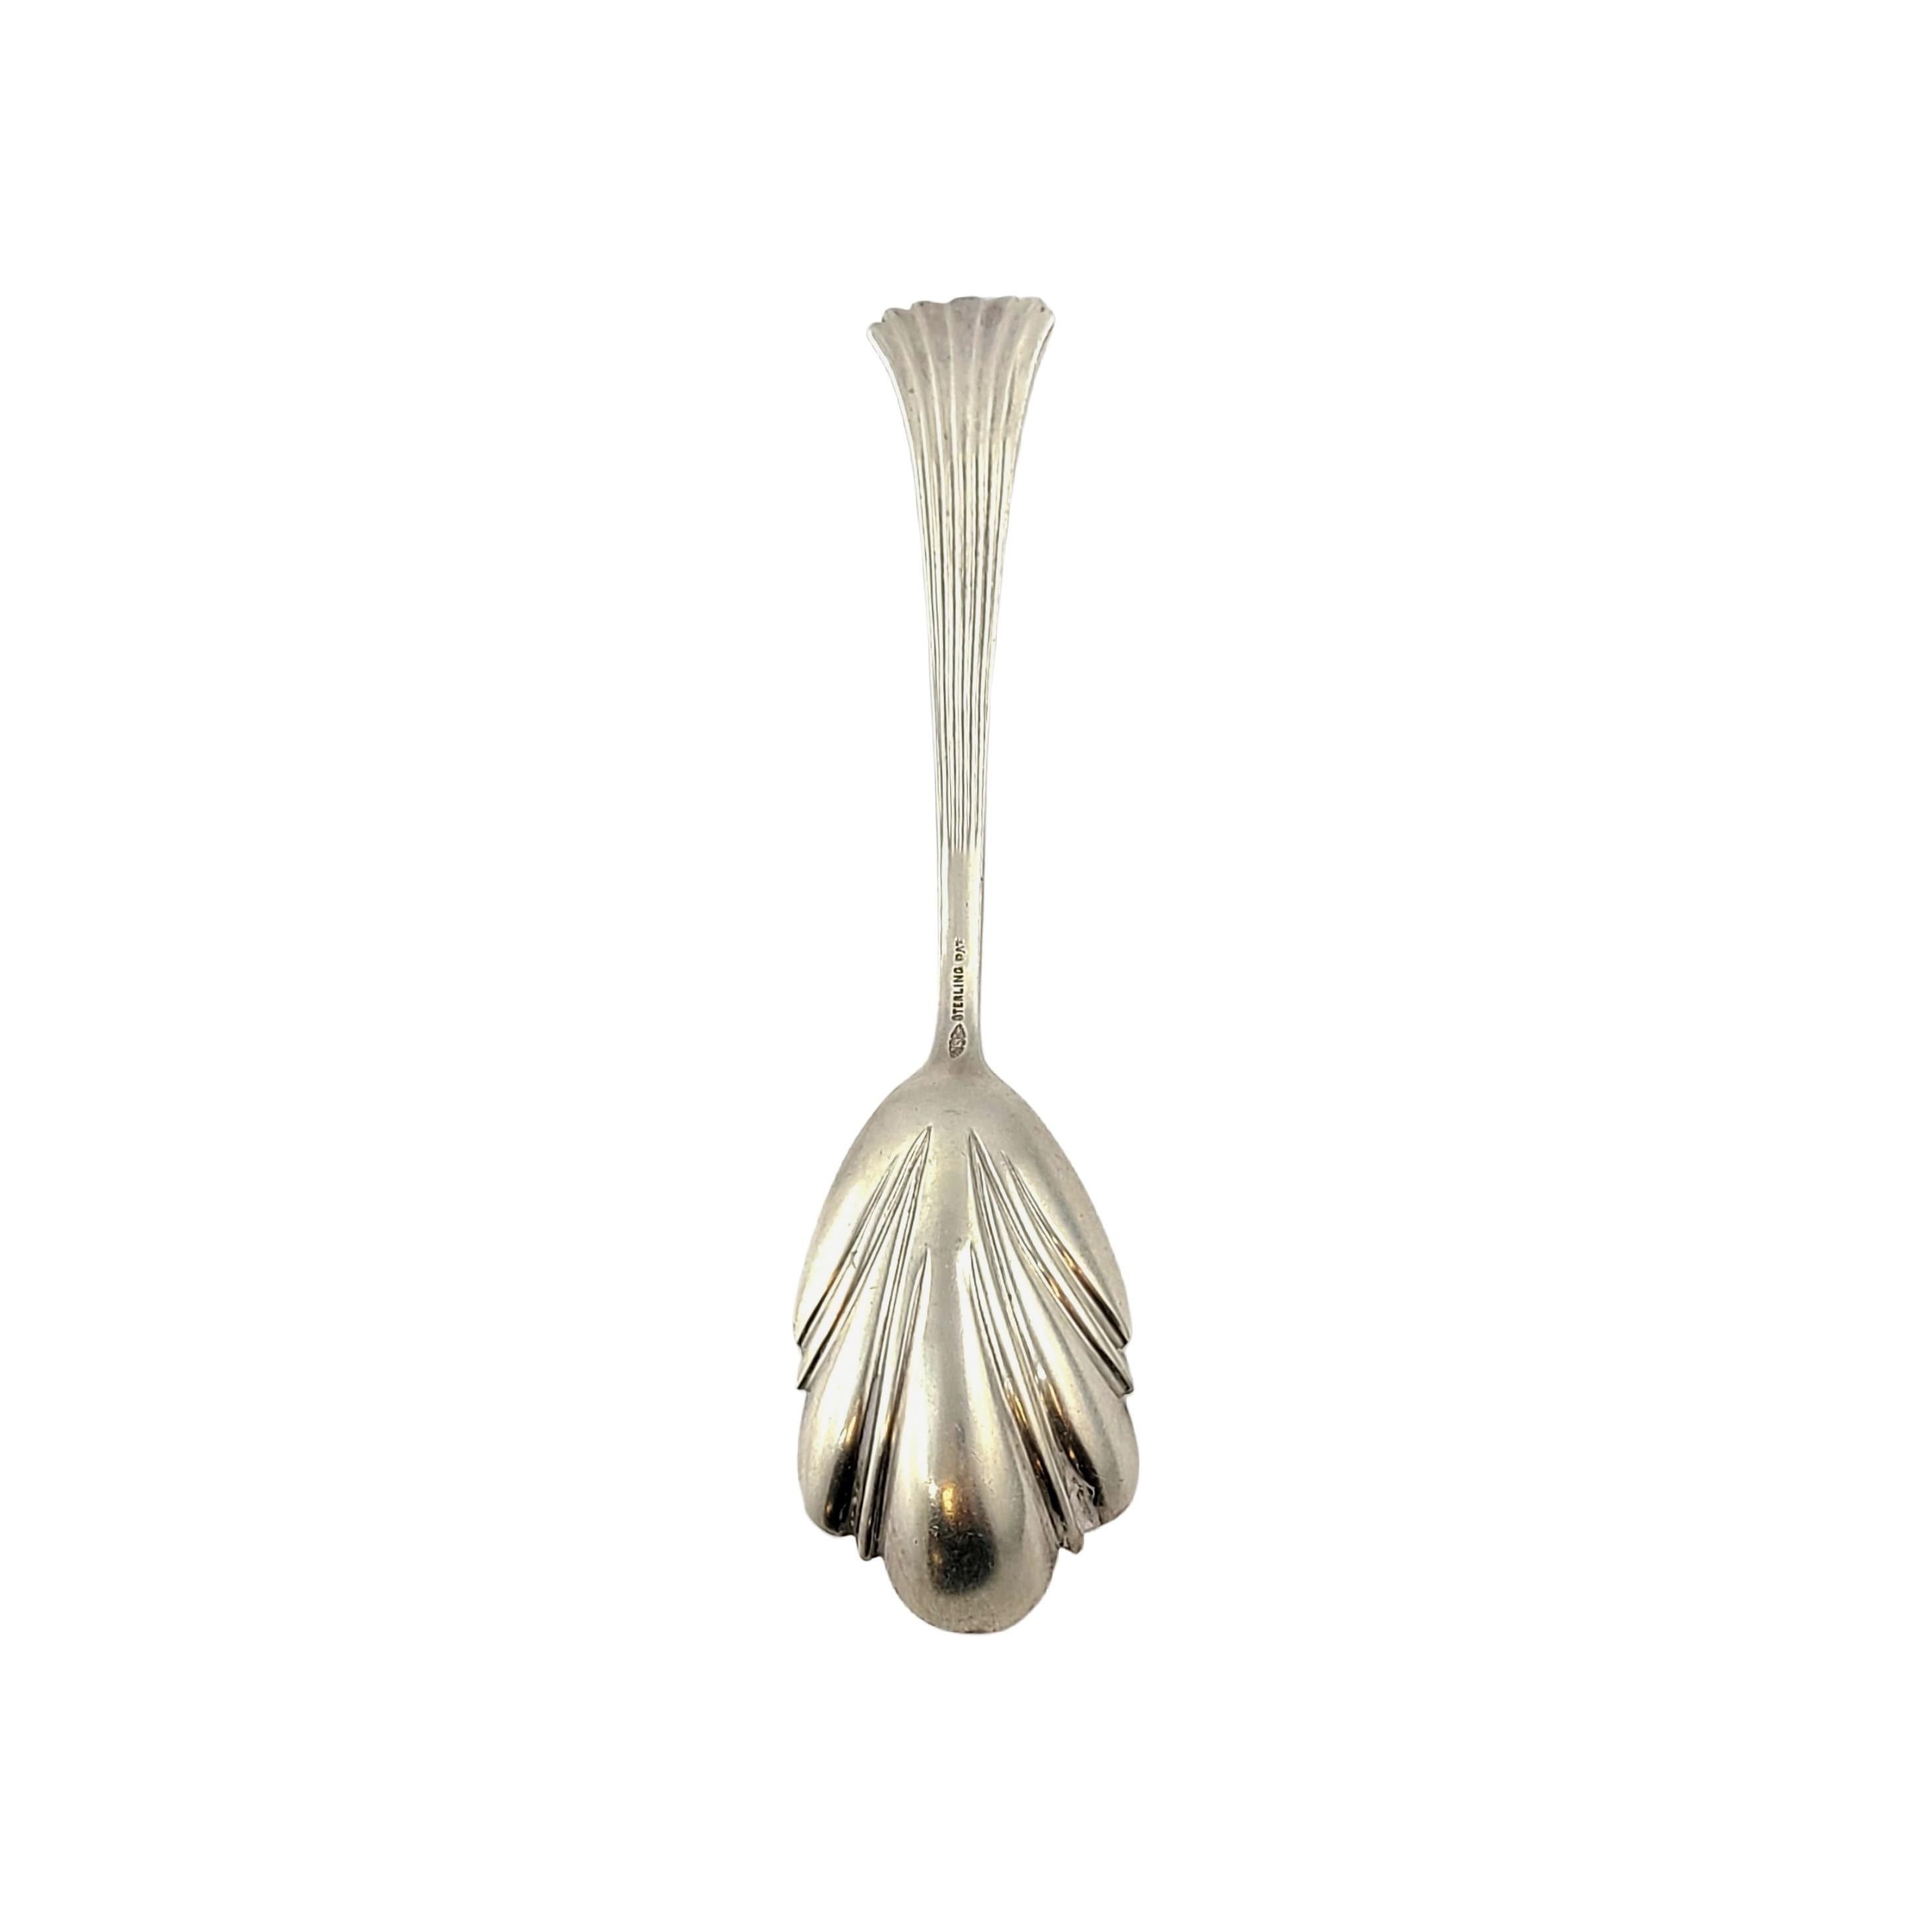 Sterling silver sugar spoon with shell bowl in the No 1 pattern, by George W Shiebler.

George Shiebler is known for his distinctive silver patterns. No 1 is simple yet ornate featuring alternating polished and textured stripes on the handle,